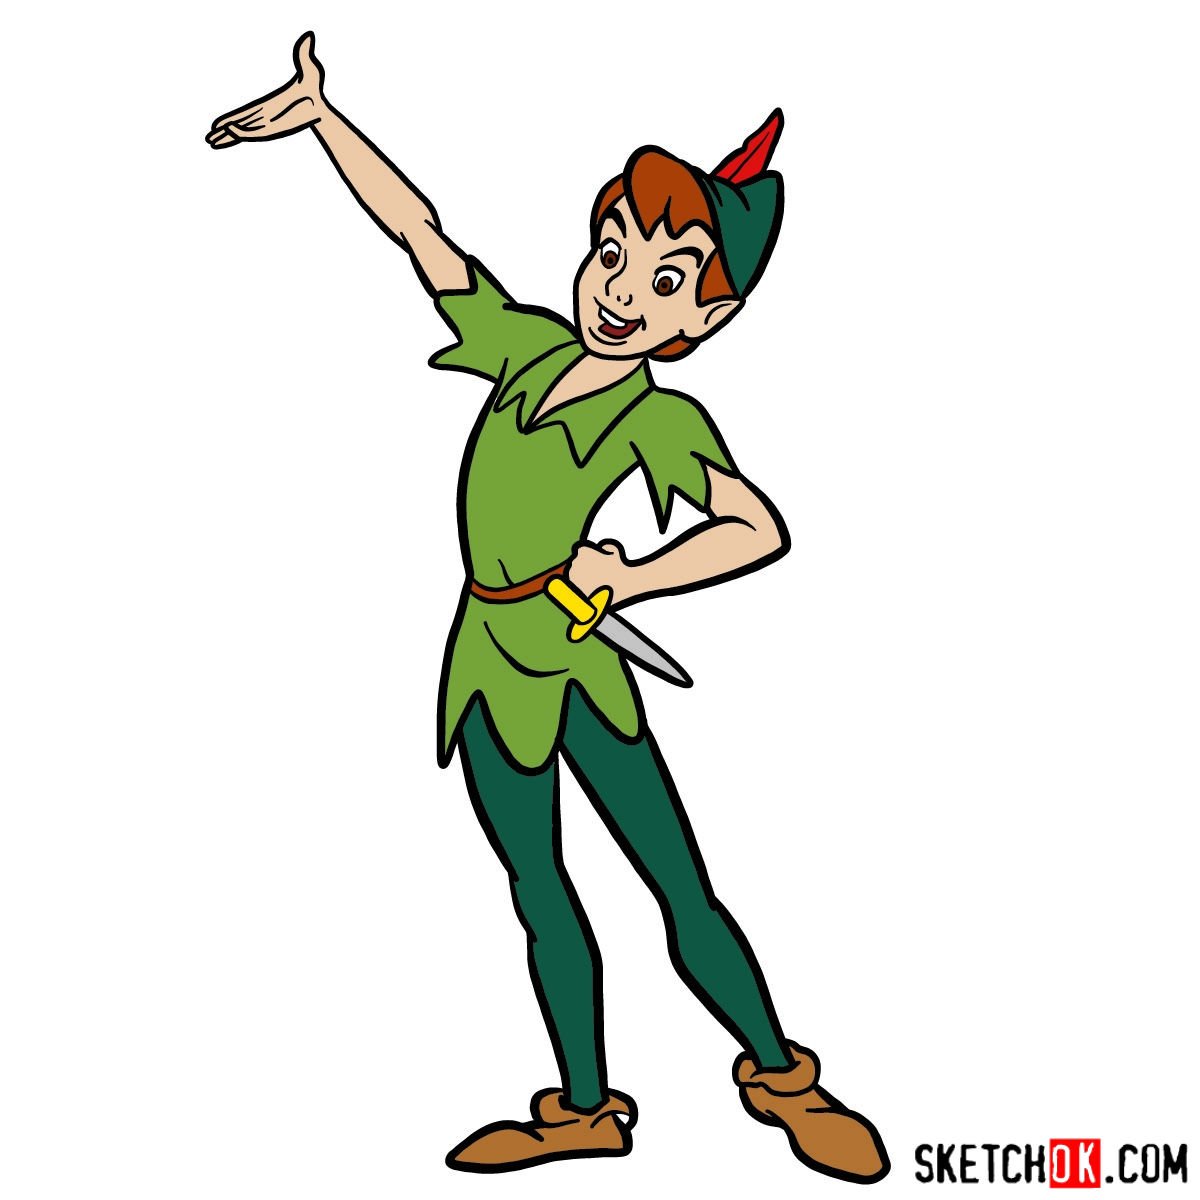 How to draw Peter Pan